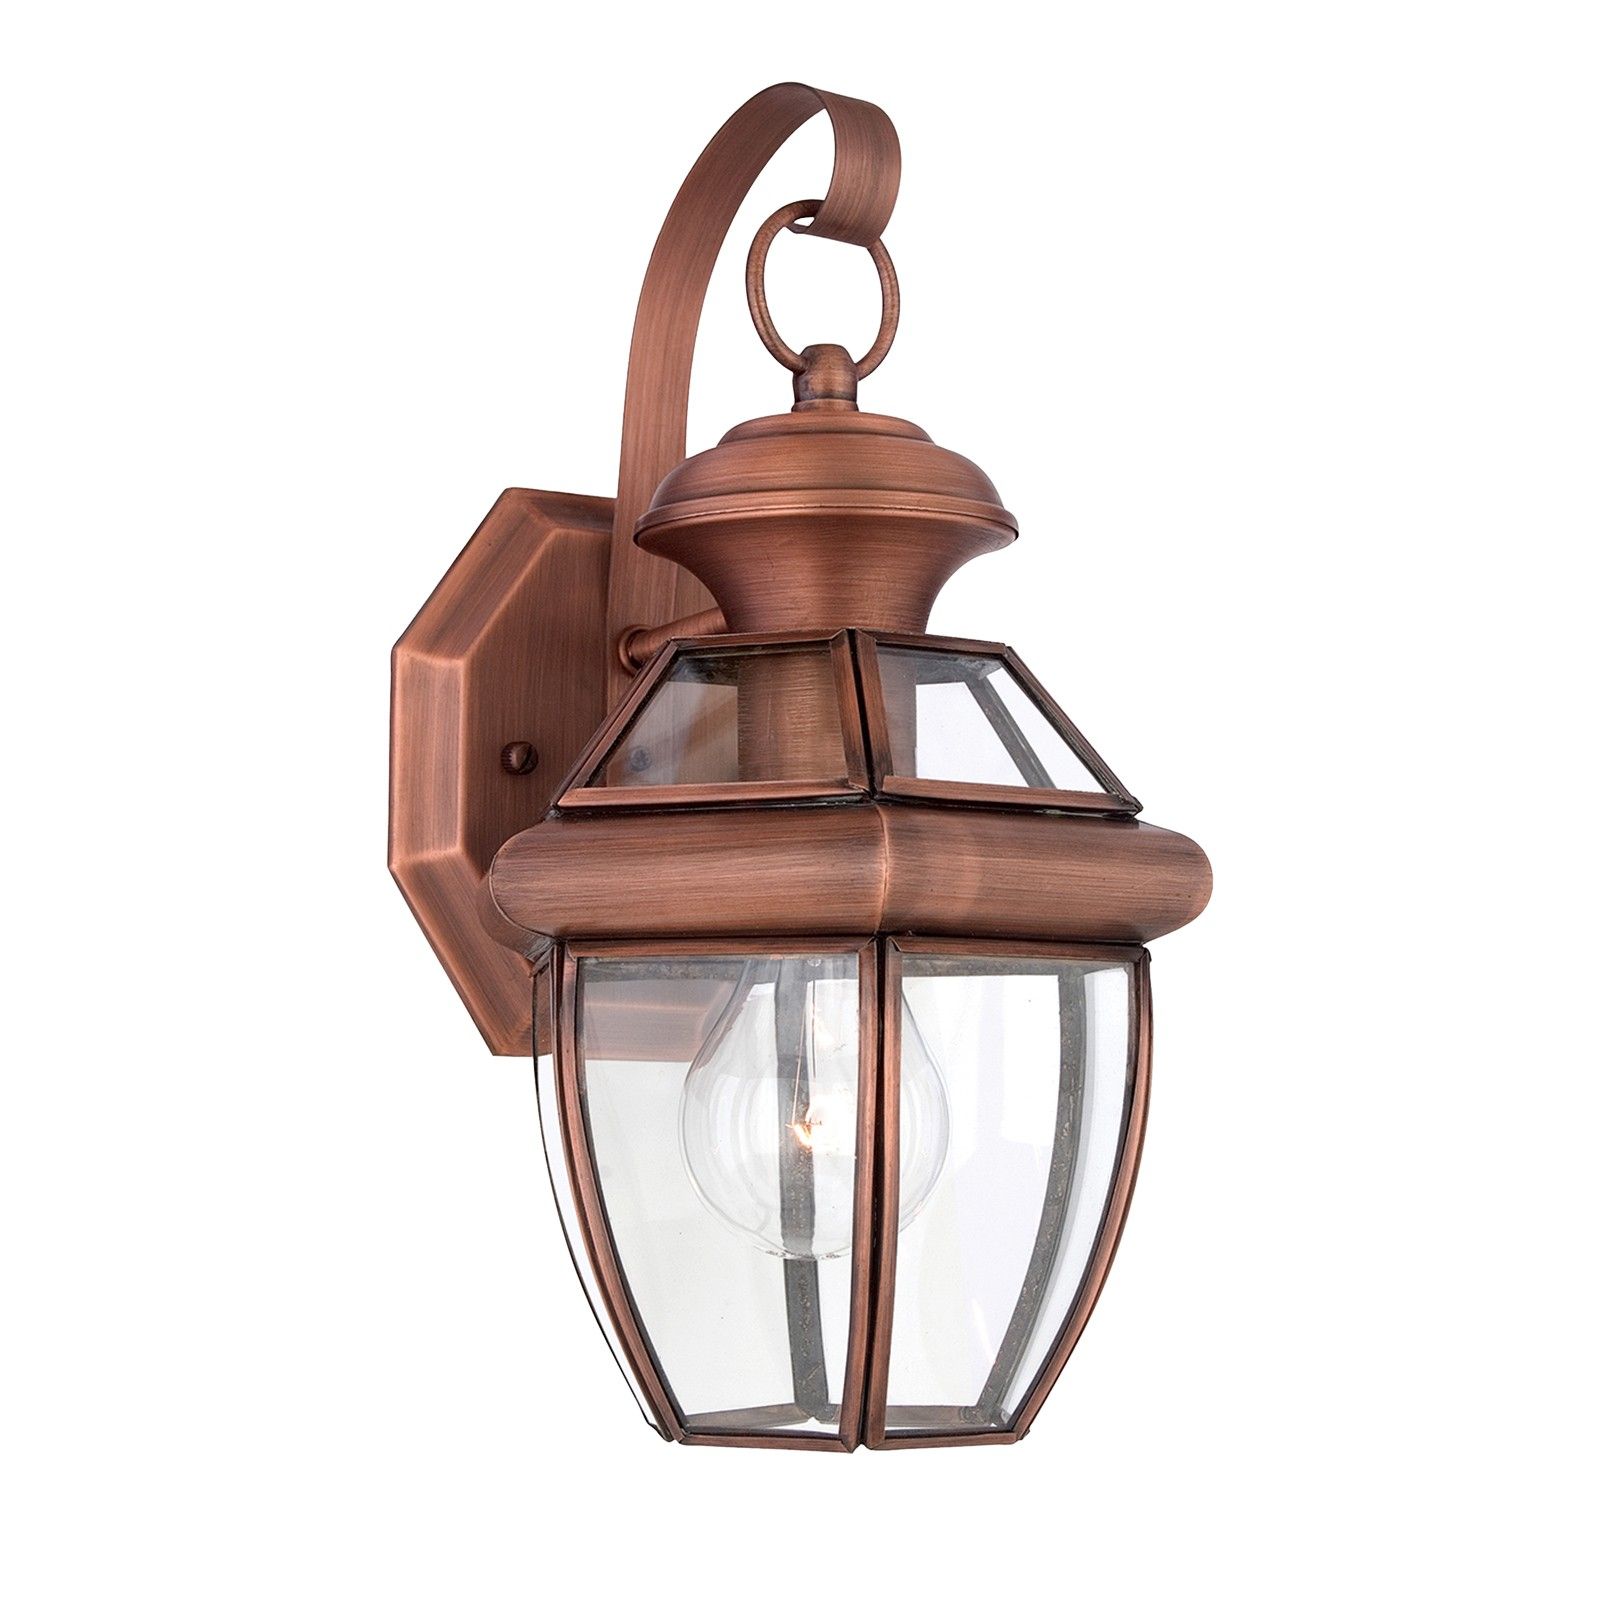 Newbury small wall light in Aged Copper